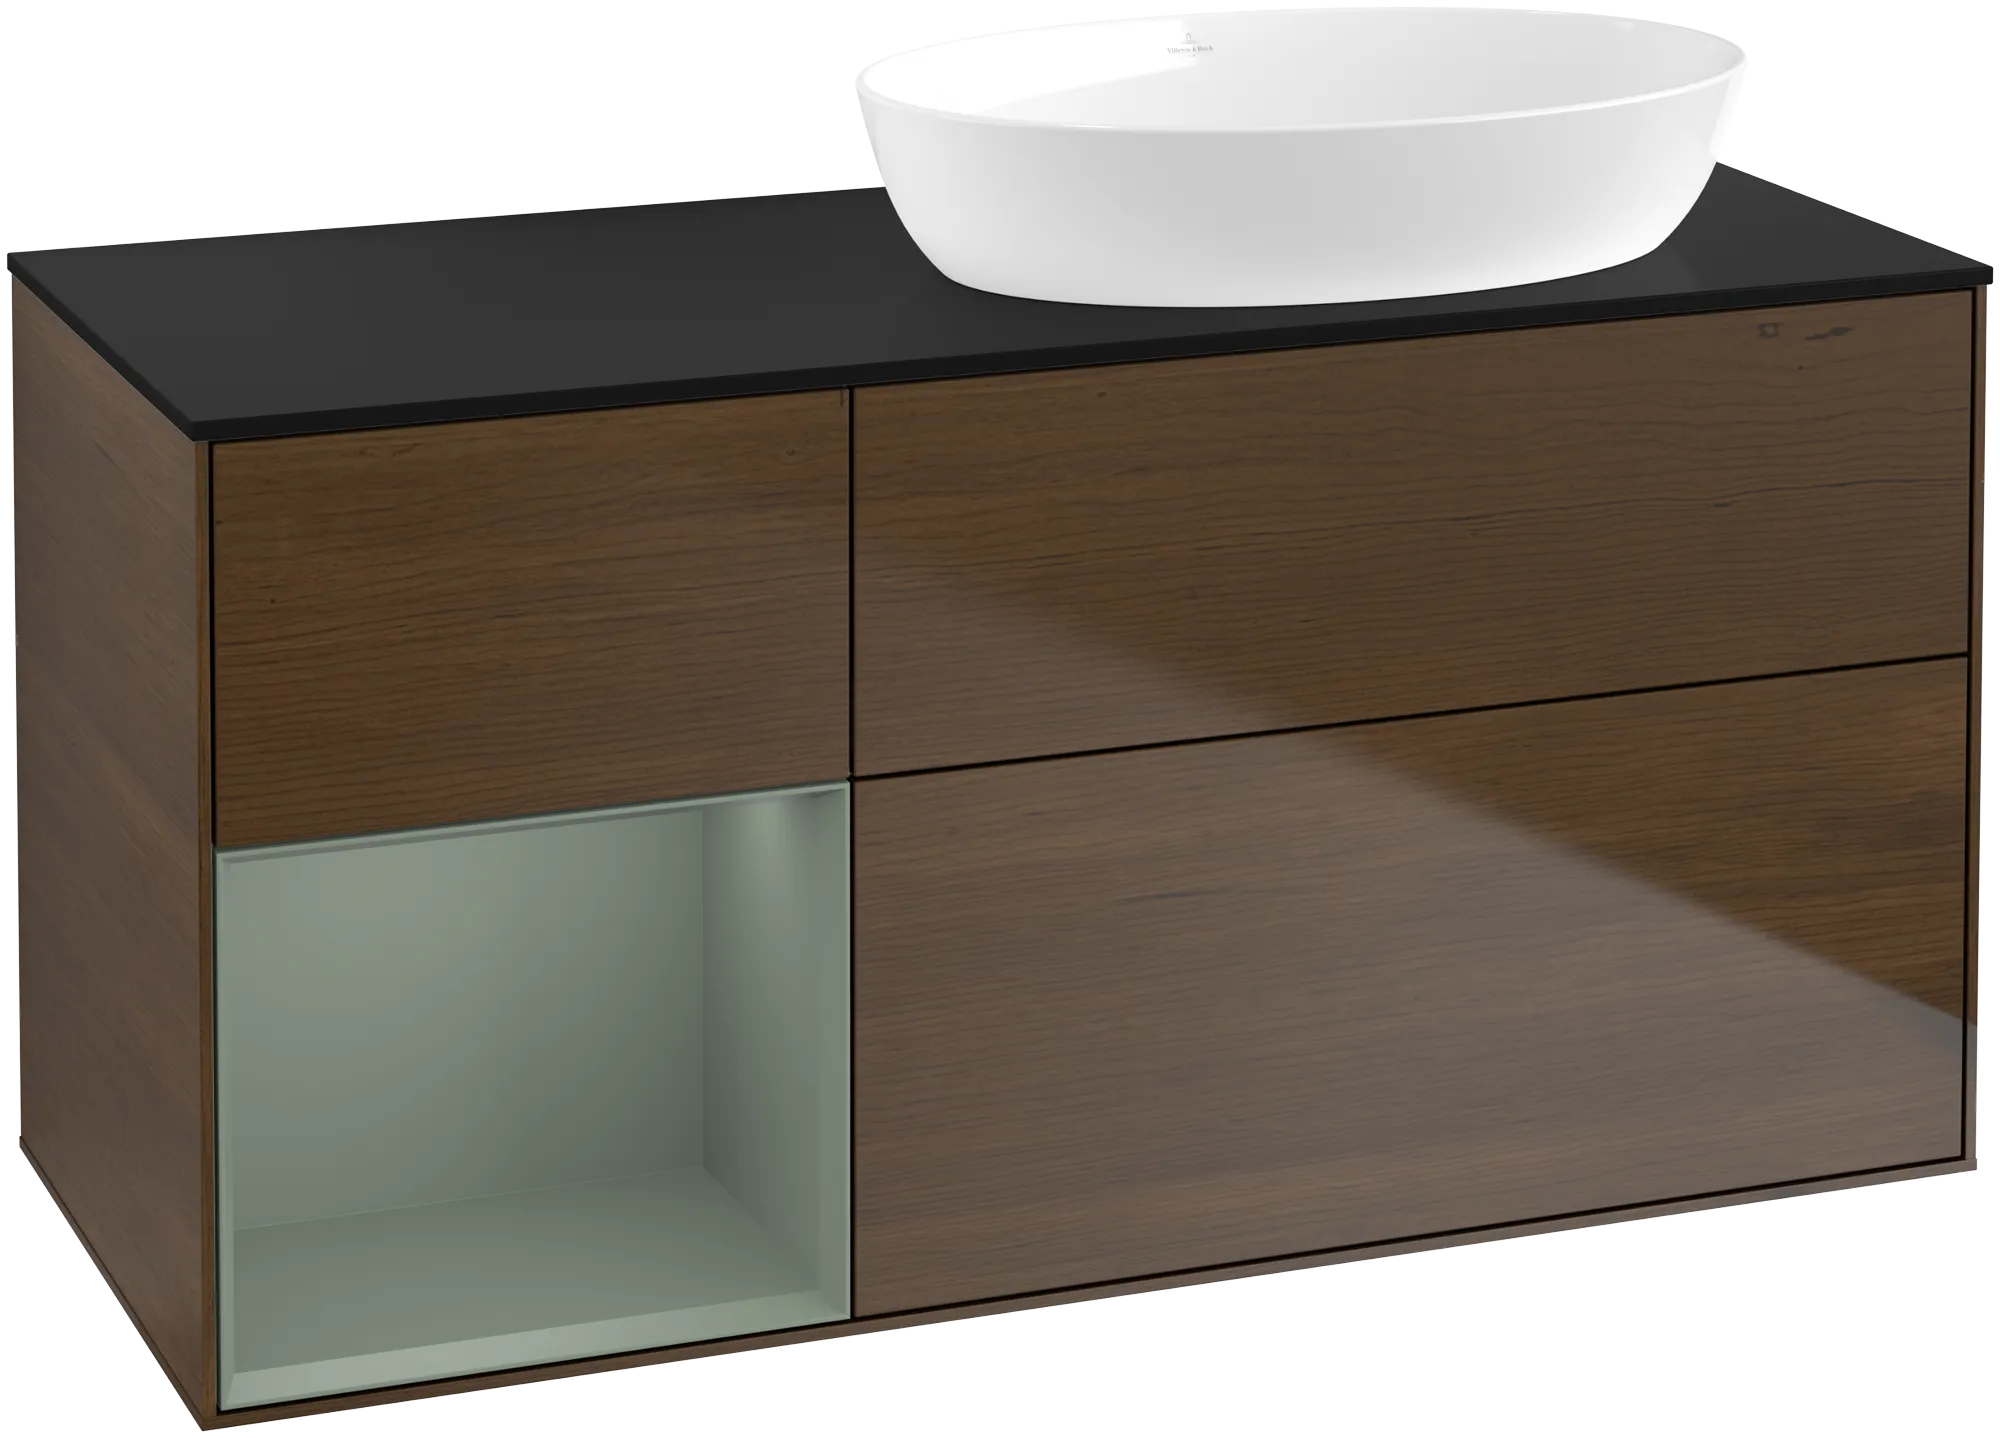 Picture of VILLEROY BOCH Finion Vanity unit, with lighting, 3 pull-out compartments, 1200 x 603 x 501 mm, Walnut Veneer / Olive Matt Lacquer / Glass Black Matt #GA42GMGN